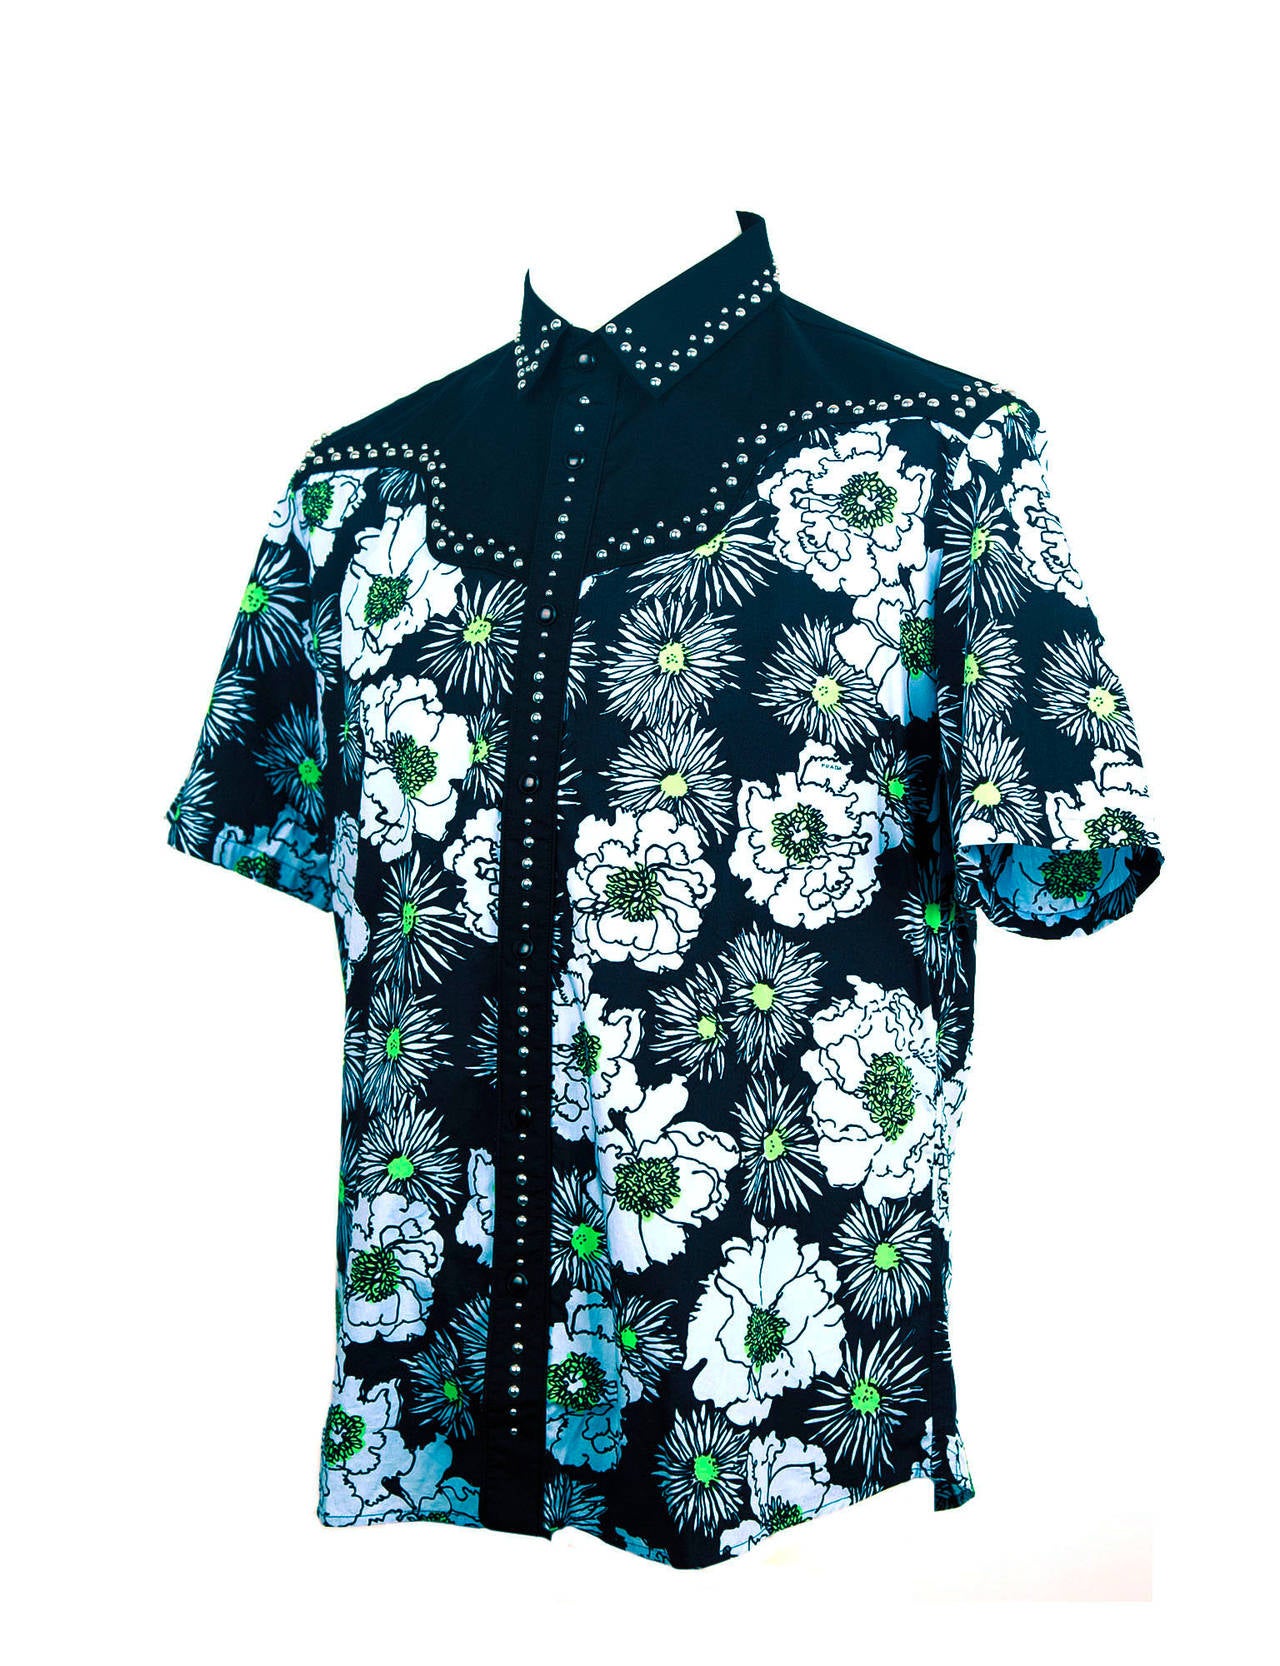 Prada Spring 2012 cowboy studded shirt with Miami Floral print in light blue, chartreuse and black background. Shirts front placket, yoke and collar are solid black cotton with silver stud detail, short sleeve with fitted shape. 